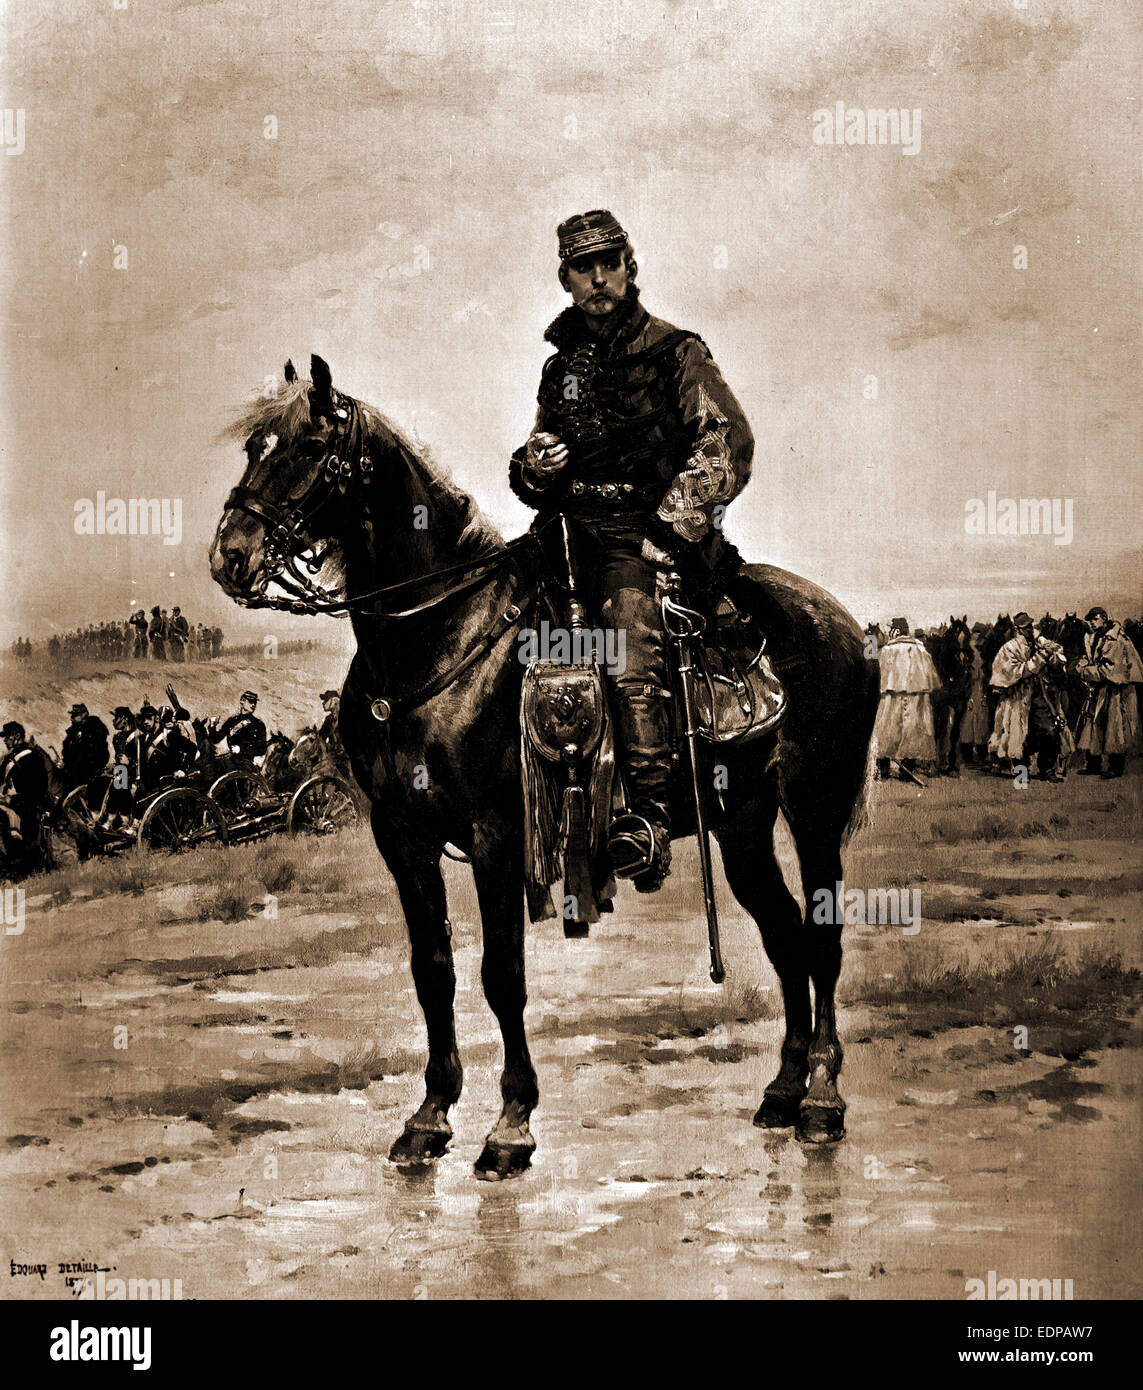 A mounted officer, Detaille, Jean Baptiste Edouard, 1848-1912, Military officers, Cavalry, 1902 Stock Photo